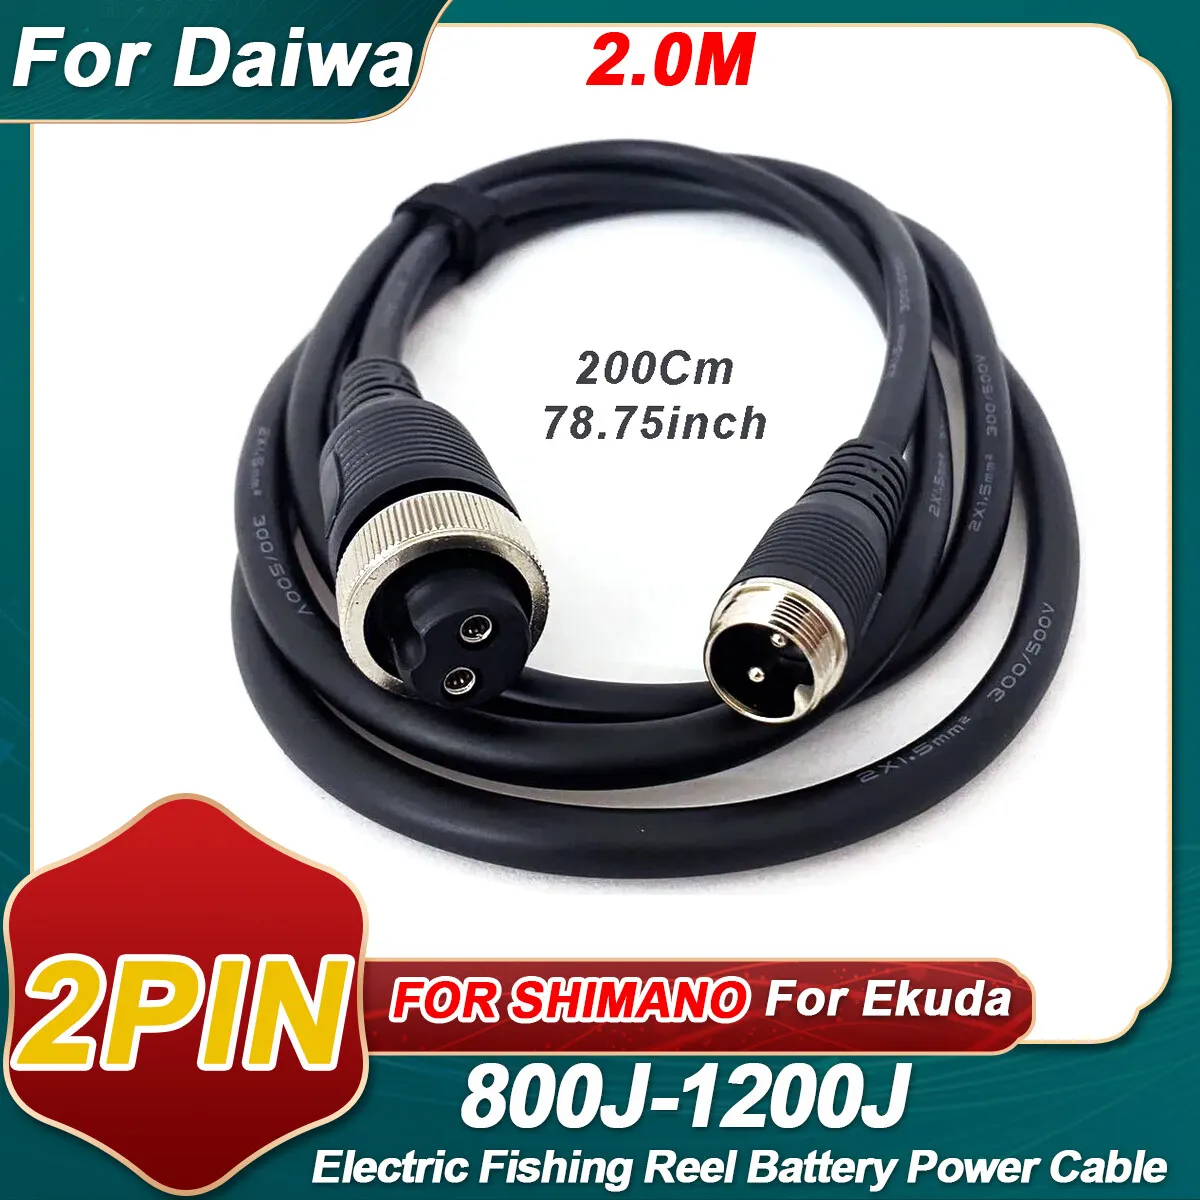 3.0M Power Cable For Daiwa 1200MJ 1200J 800MJ 800MJS Electric Reel